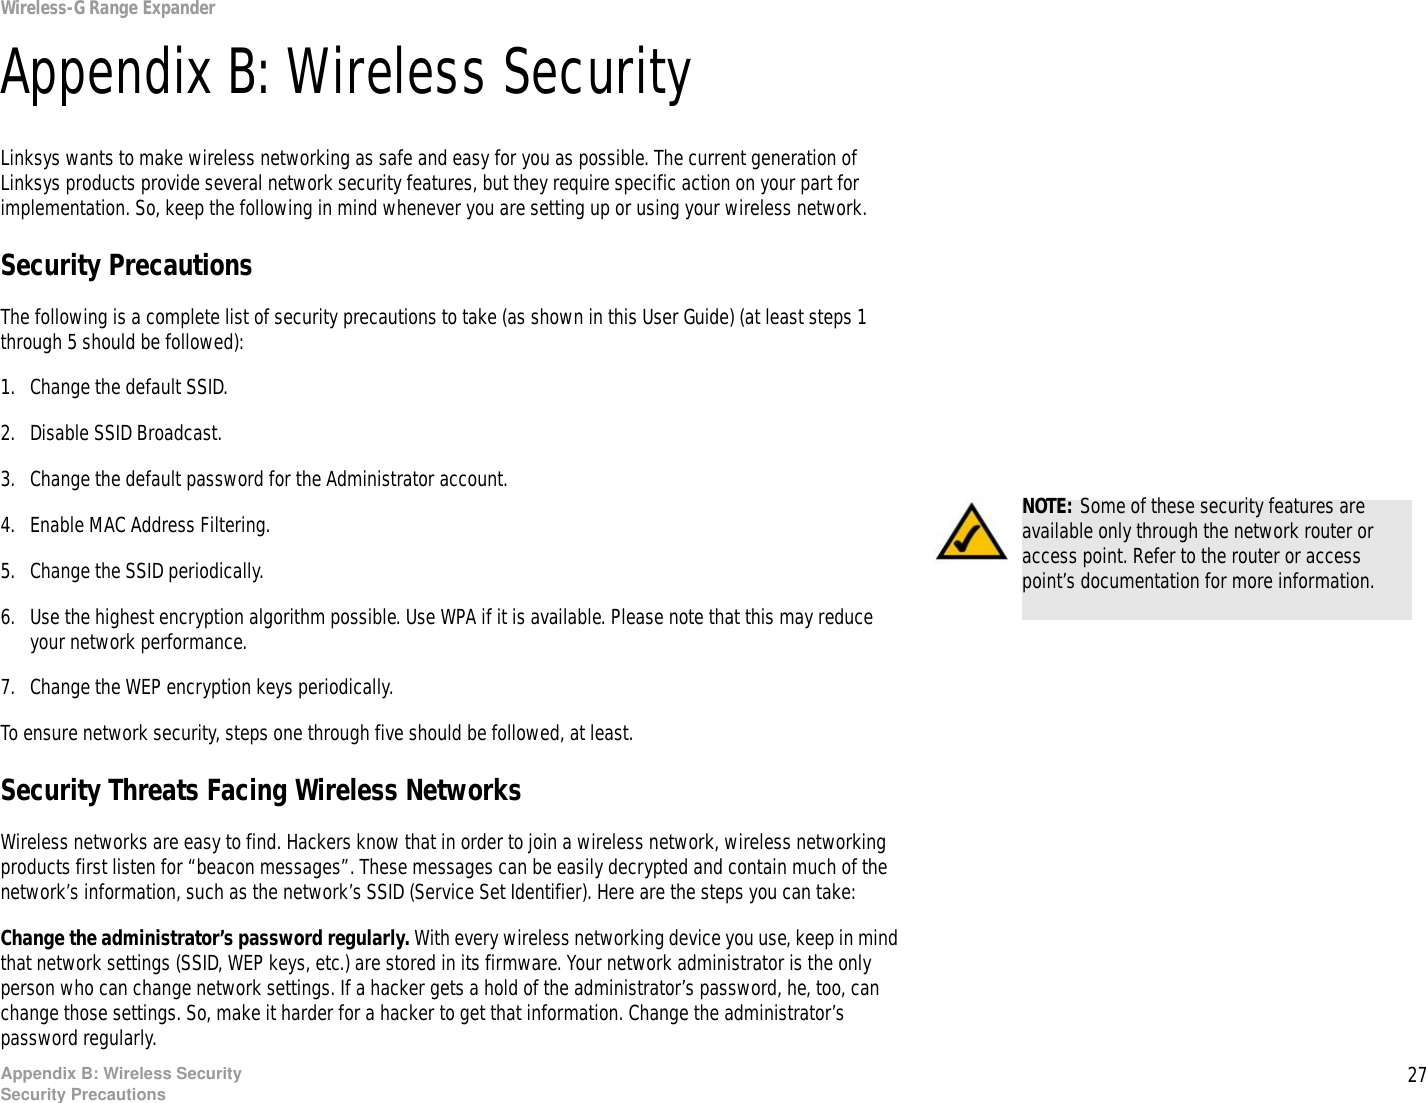 27Appendix B: Wireless SecuritySecurity PrecautionsWireless-G Range ExpanderAppendix B: Wireless SecurityLinksys wants to make wireless networking as safe and easy for you as possible. The current generation of Linksys products provide several network security features, but they require specific action on your part for implementation. So, keep the following in mind whenever you are setting up or using your wireless network.Security PrecautionsThe following is a complete list of security precautions to take (as shown in this User Guide) (at least steps 1 through 5 should be followed):1. Change the default SSID. 2. Disable SSID Broadcast. 3. Change the default password for the Administrator account. 4. Enable MAC Address Filtering. 5. Change the SSID periodically. 6. Use the highest encryption algorithm possible. Use WPA if it is available. Please note that this may reduce your network performance. 7. Change the WEP encryption keys periodically. To ensure network security, steps one through five should be followed, at least.Security Threats Facing Wireless Networks Wireless networks are easy to find. Hackers know that in order to join a wireless network, wireless networking products first listen for “beacon messages”. These messages can be easily decrypted and contain much of the network’s information, such as the network’s SSID (Service Set Identifier). Here are the steps you can take:Change the administrator’s password regularly. With every wireless networking device you use, keep in mind that network settings (SSID, WEP keys, etc.) are stored in its firmware. Your network administrator is the only person who can change network settings. If a hacker gets a hold of the administrator’s password, he, too, can change those settings. So, make it harder for a hacker to get that information. Change the administrator’s password regularly.NOTE: Some of these security features are available only through the network router or access point. Refer to the router or access point’s documentation for more information.